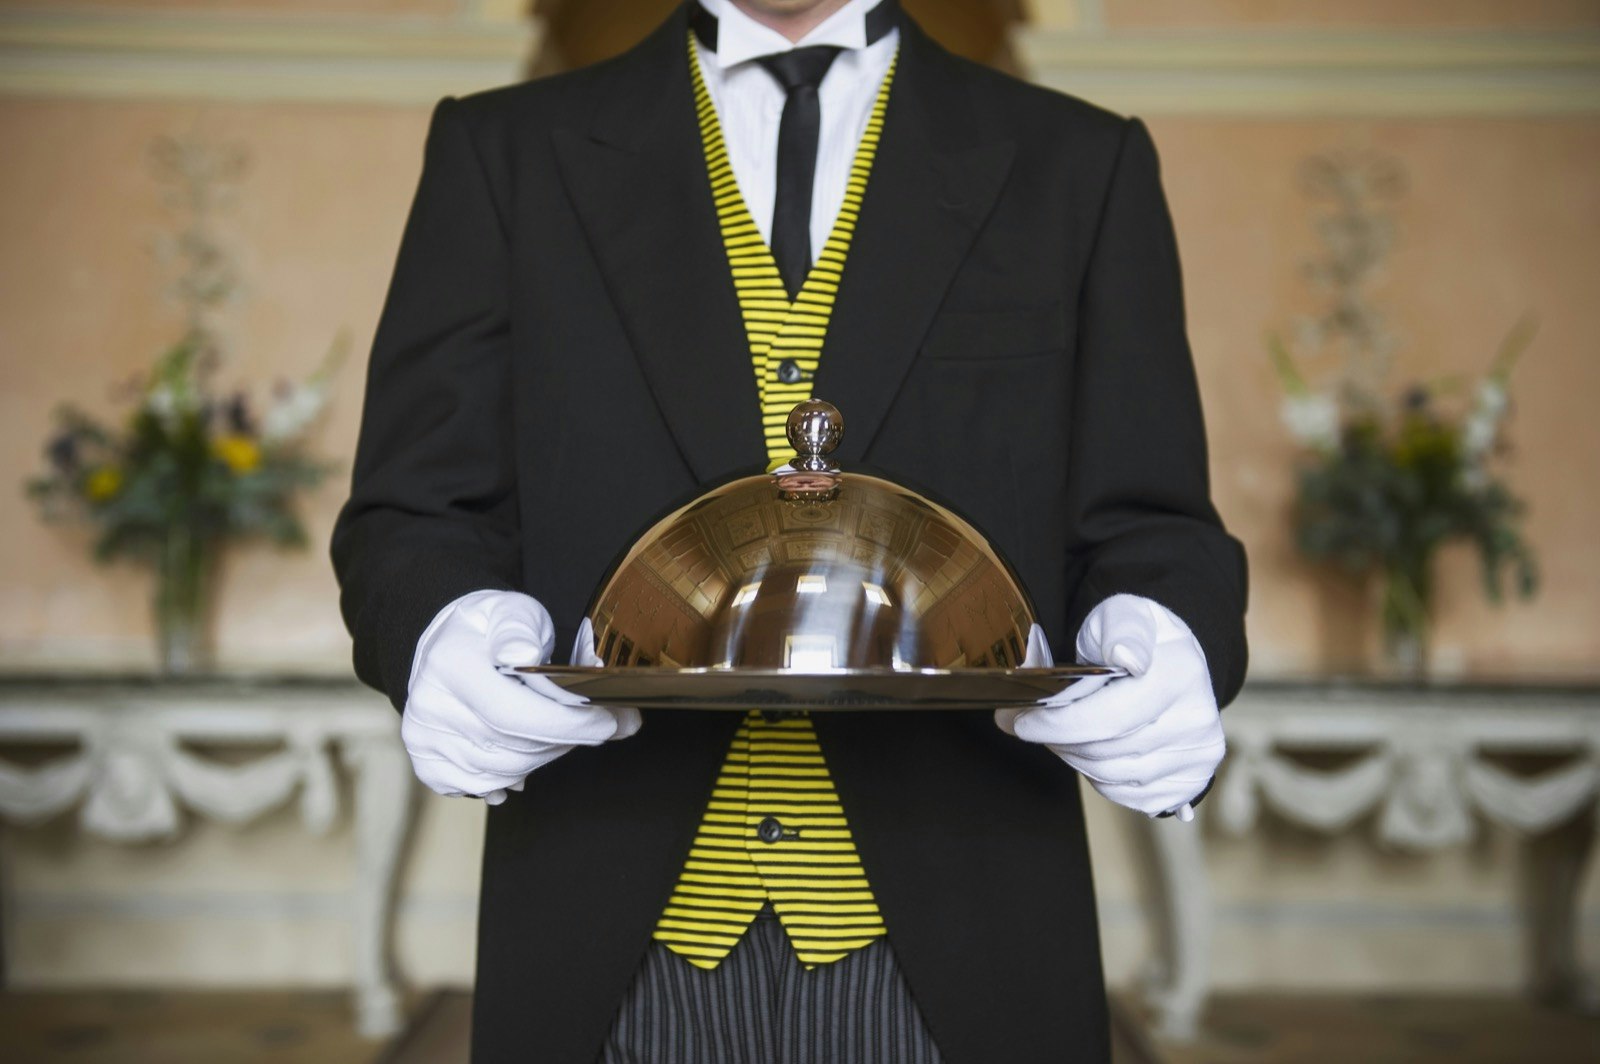 A butler holding a silver tray with a silver cloche on it